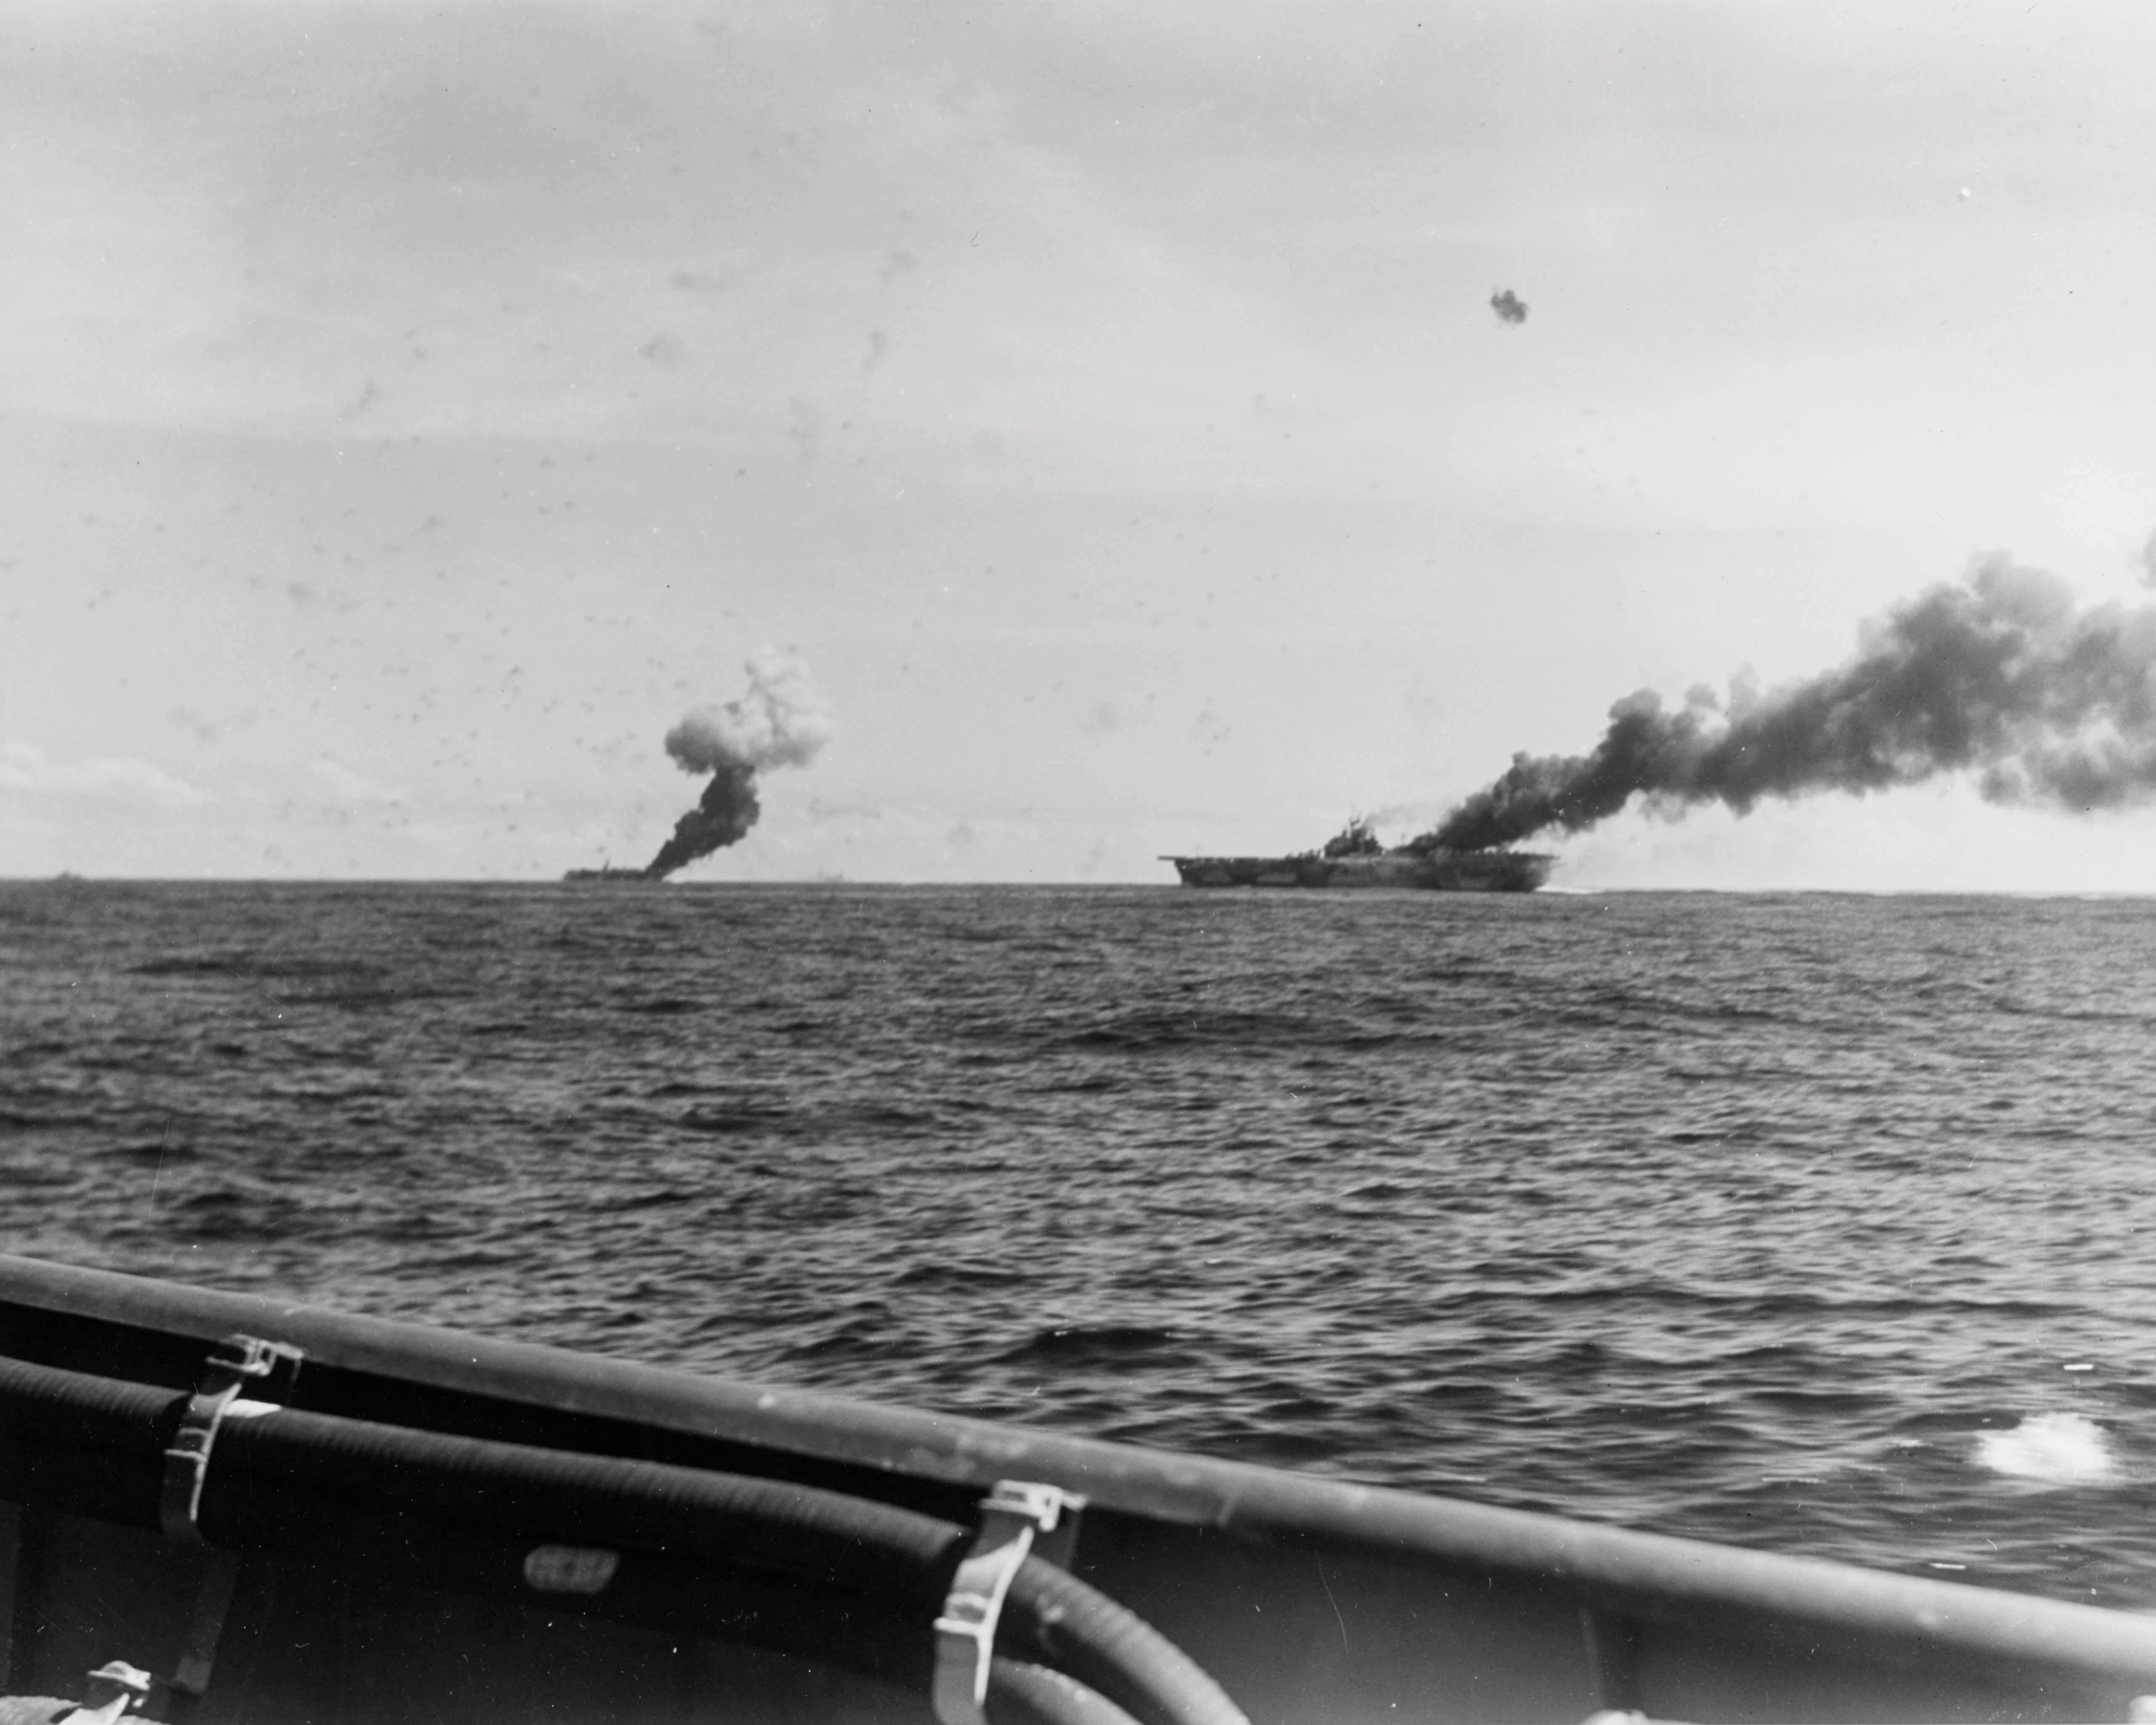 Carriers Belleau Wood and Franklin afire after being hit by suicide aircraft, off Samar, Philippine Islands, 30 Oct 1944